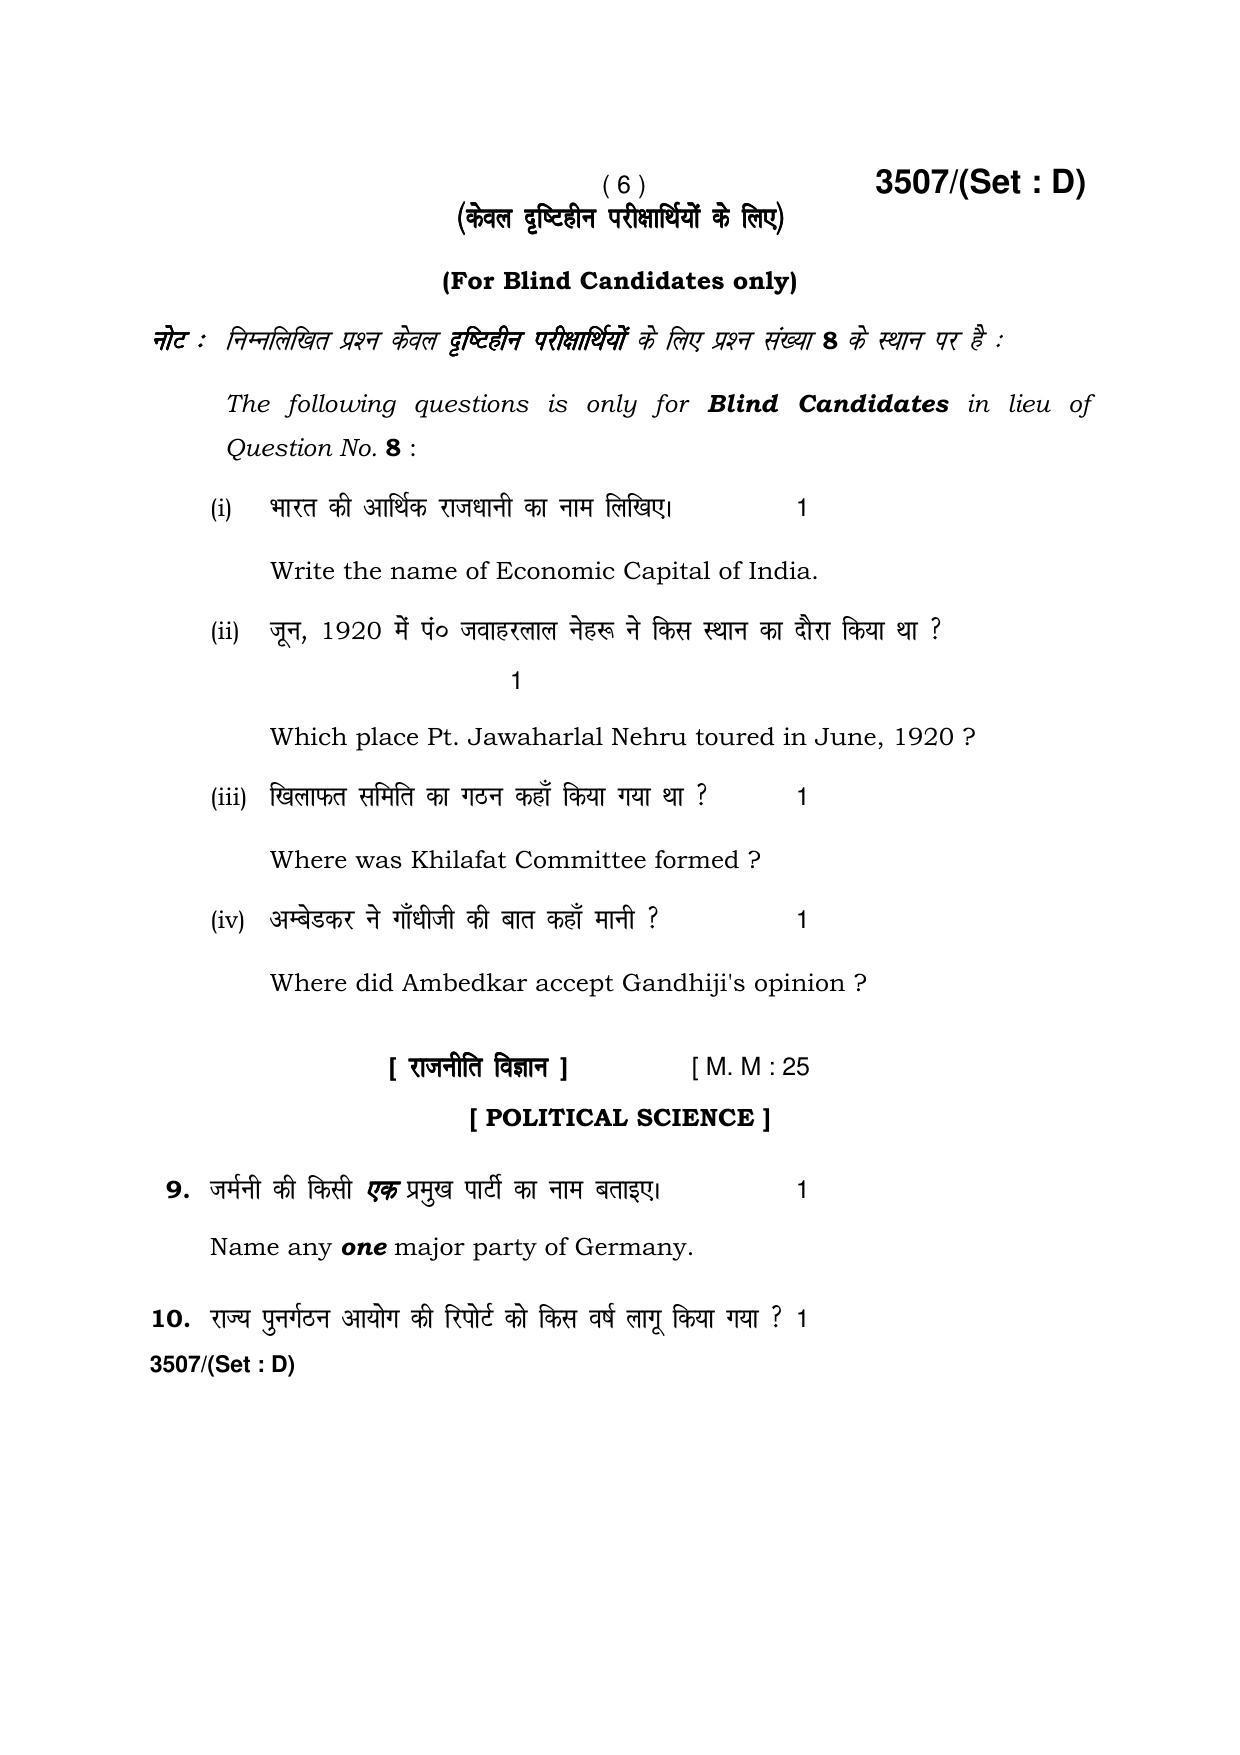 Haryana Board HBSE Class 10 Social Science -D 2018 Question Paper - Page 6